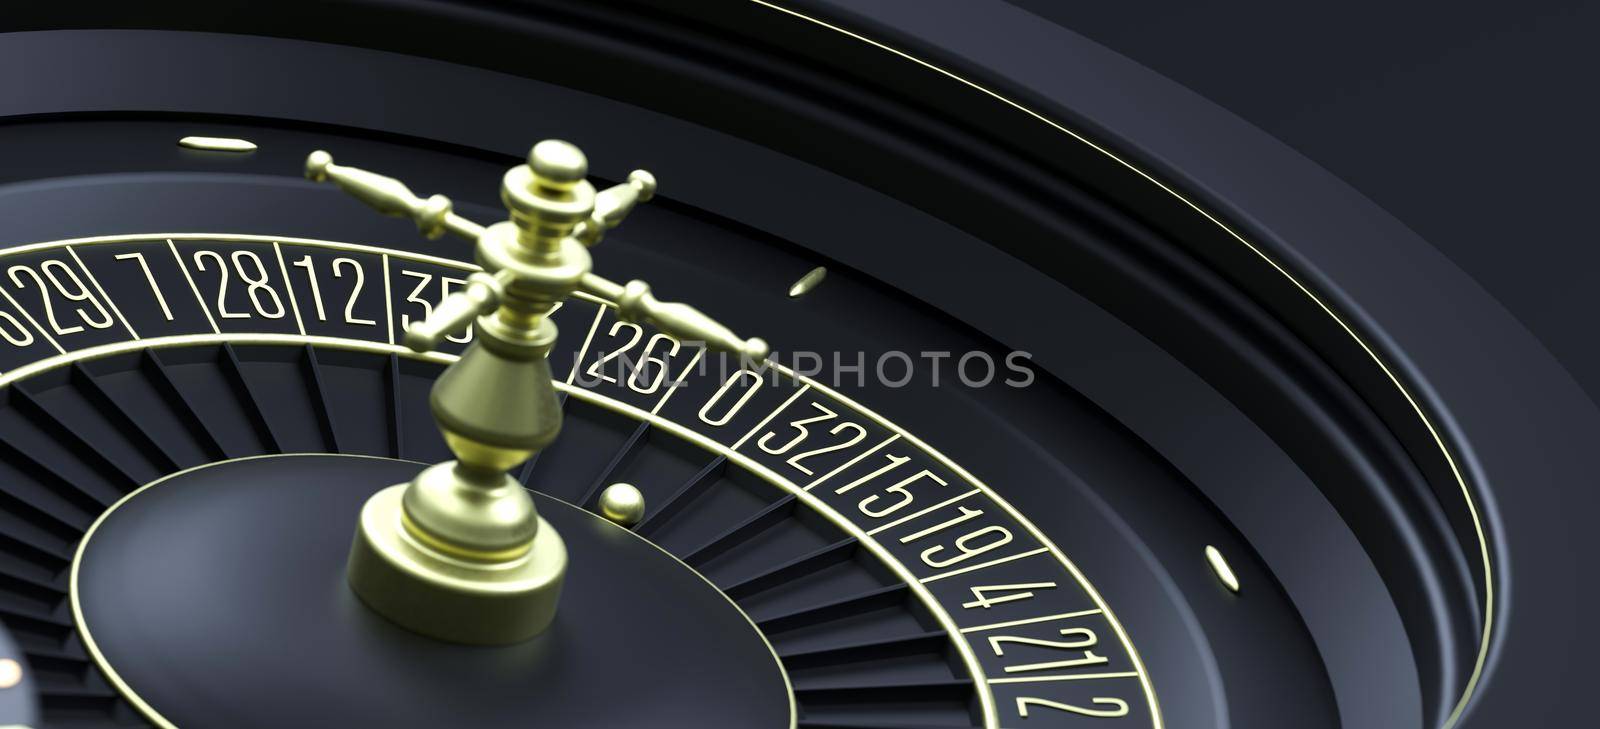 Luxury casino roulette wheel. Online casino theme. Close-up black casino roulette with ball on zero. Poker game table. Modern casino background 3d rendering. by Dvorak